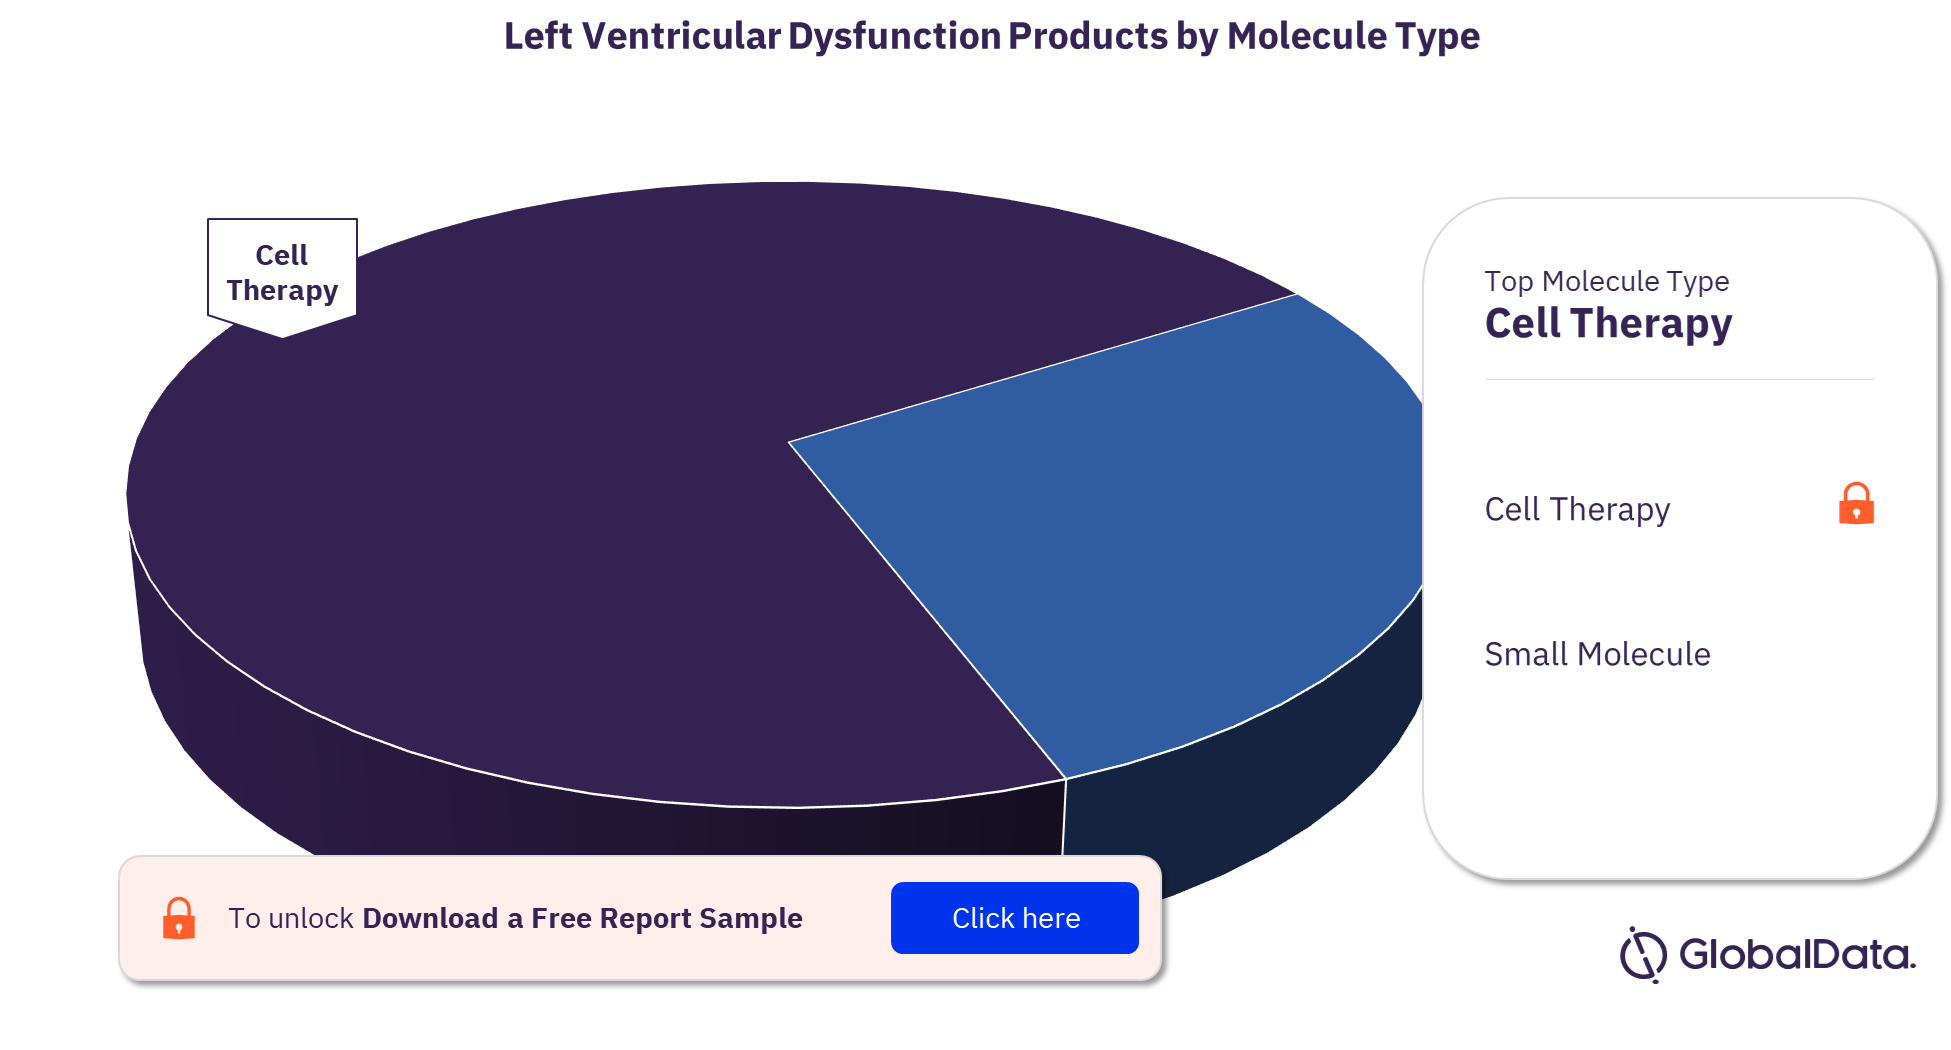 Left Ventricular Dysfunction Pipeline Products by Molecule Type